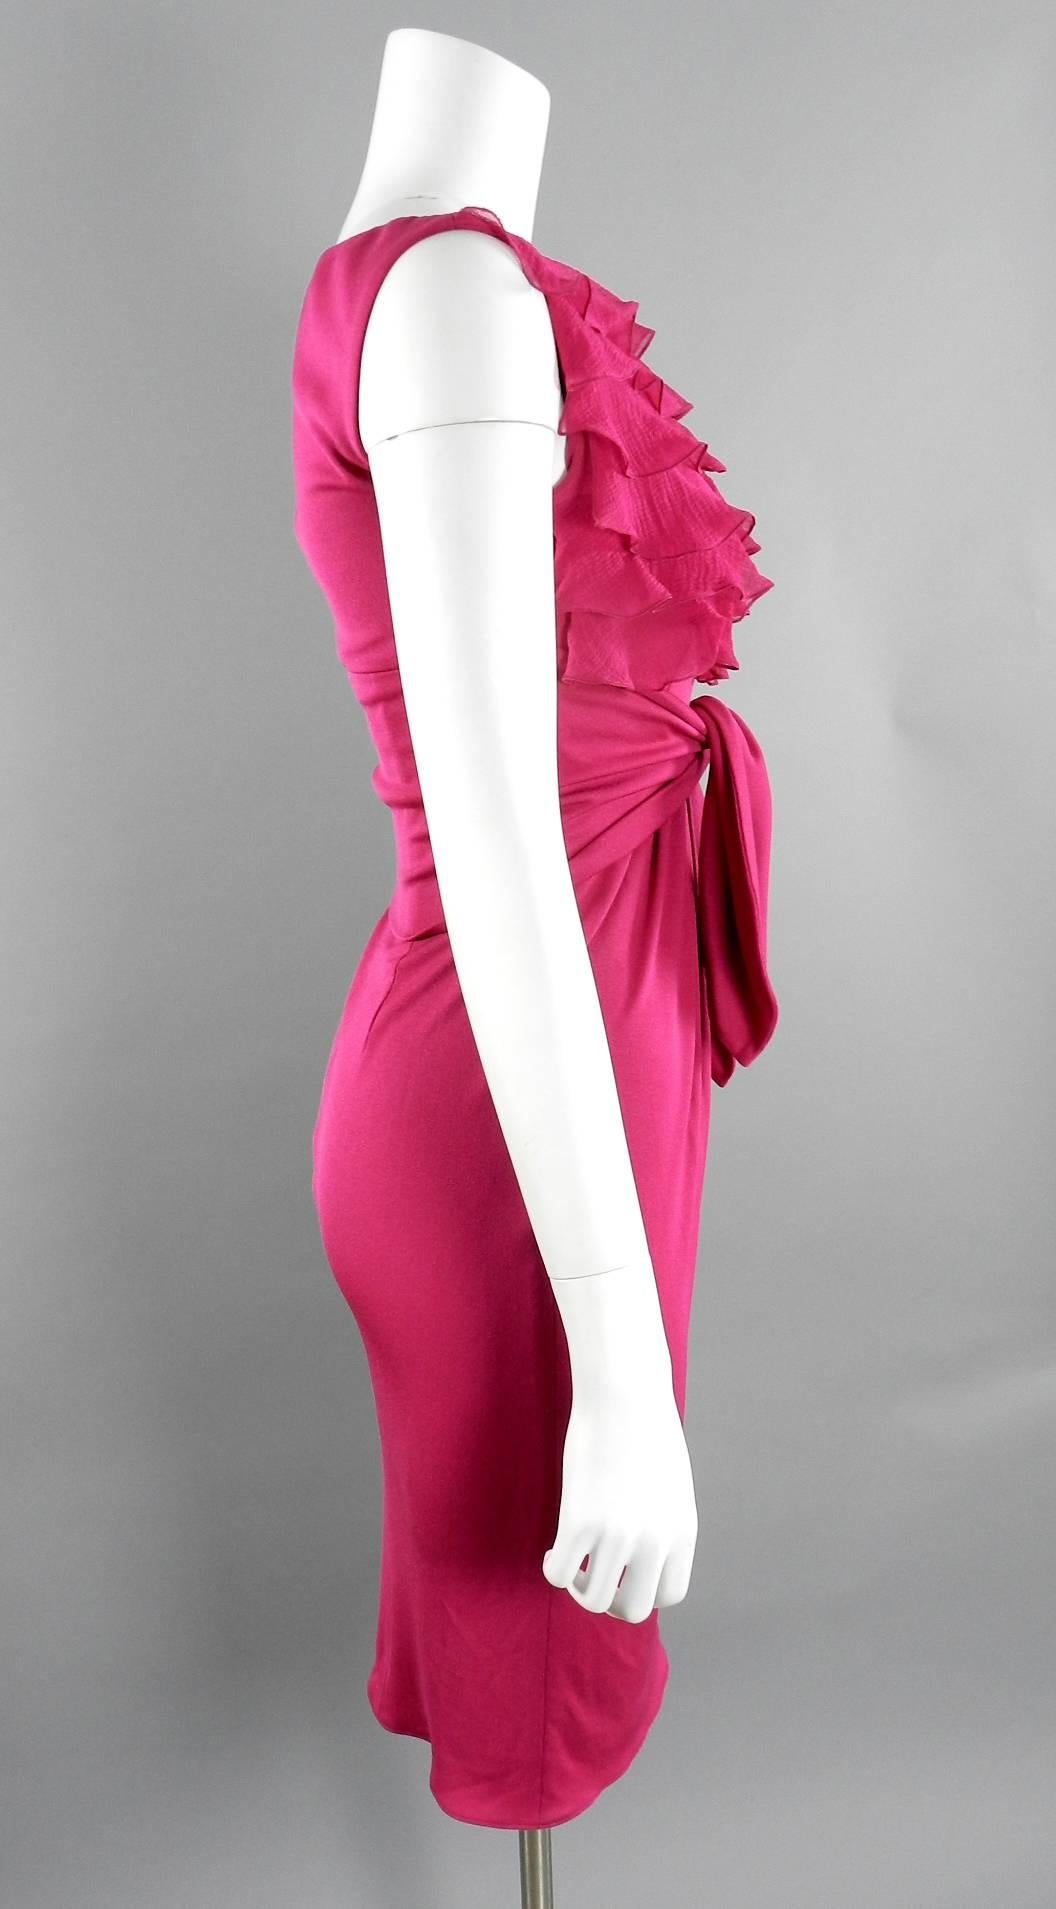 Giambattista Valli Fuchsia hot pink dress. Sheer silk chiffon ruffle detail at front chest with stretchy silk jersey body. Invisible side zipper and sashes tie at front waist. Excellent pre-owned condition. Tagged size IT 38 XXS (USA 0). To fit